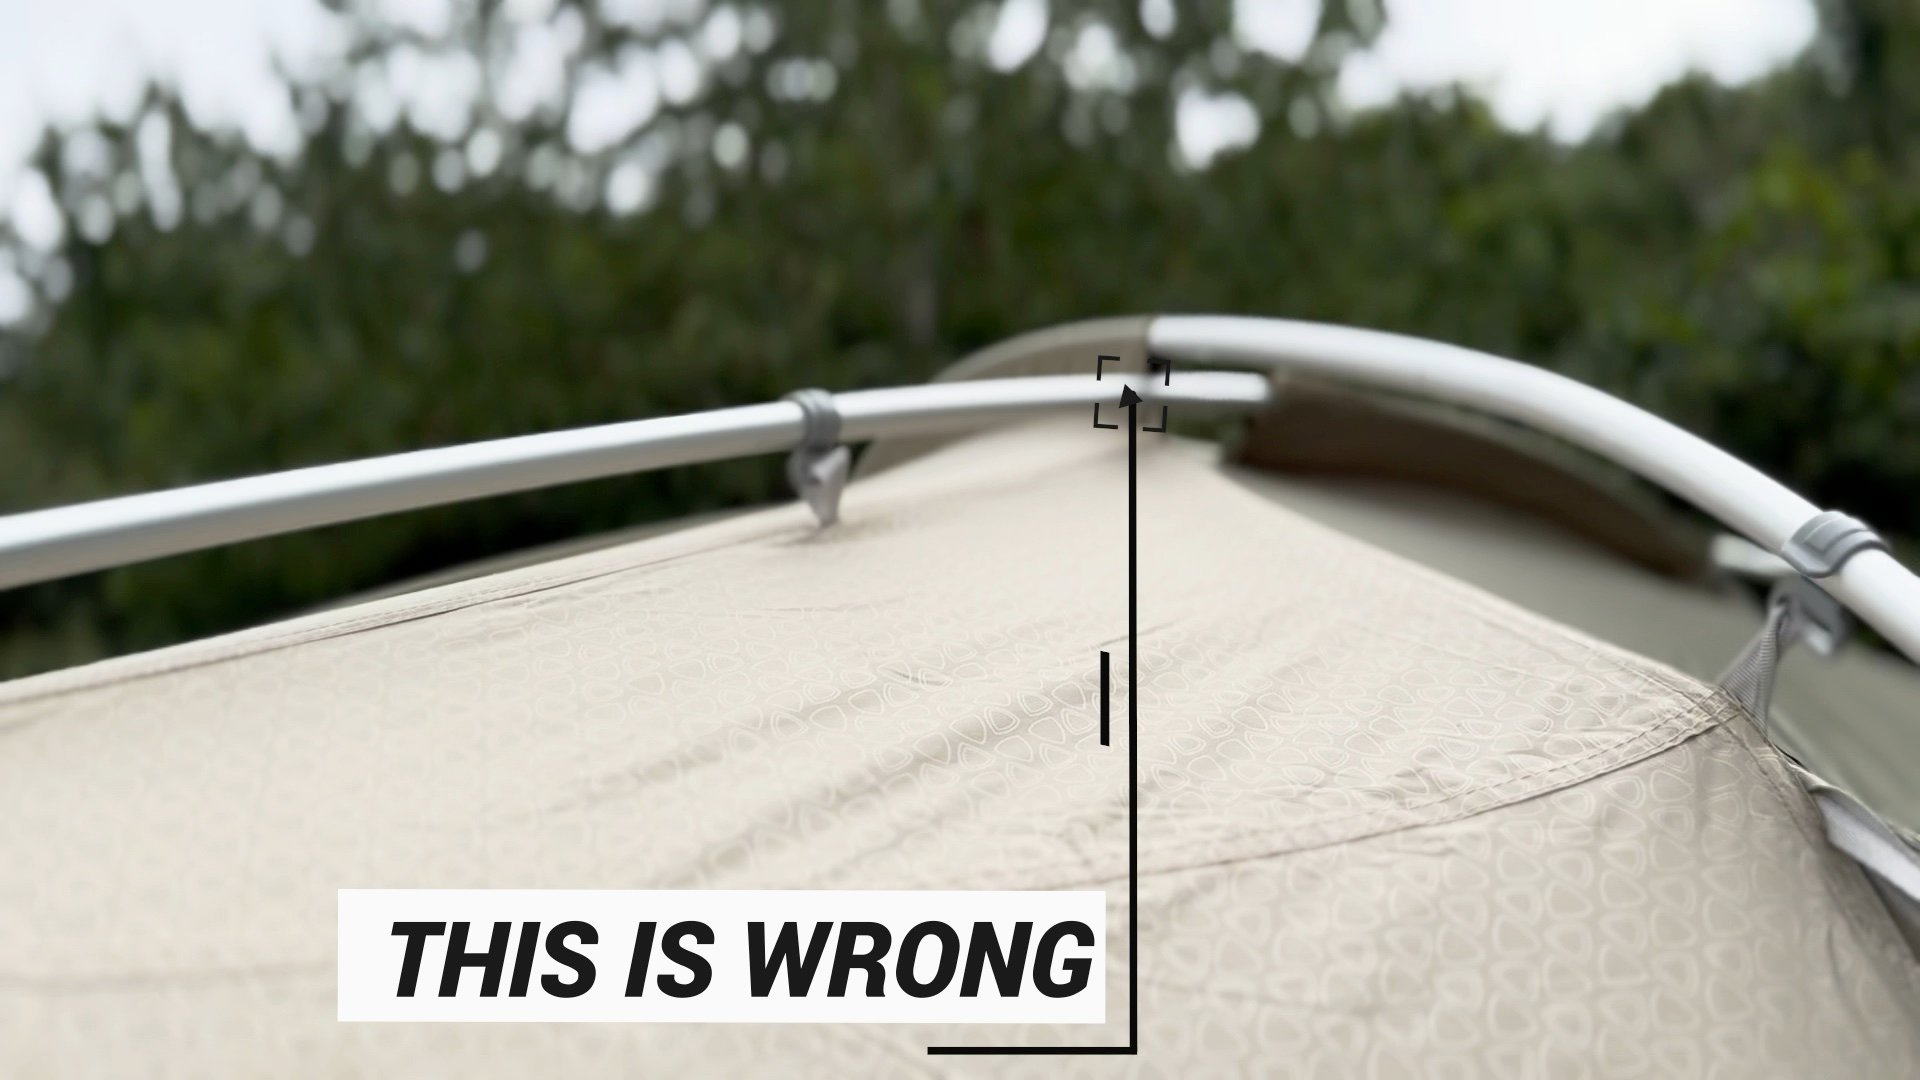 Tent poles in the wrong position